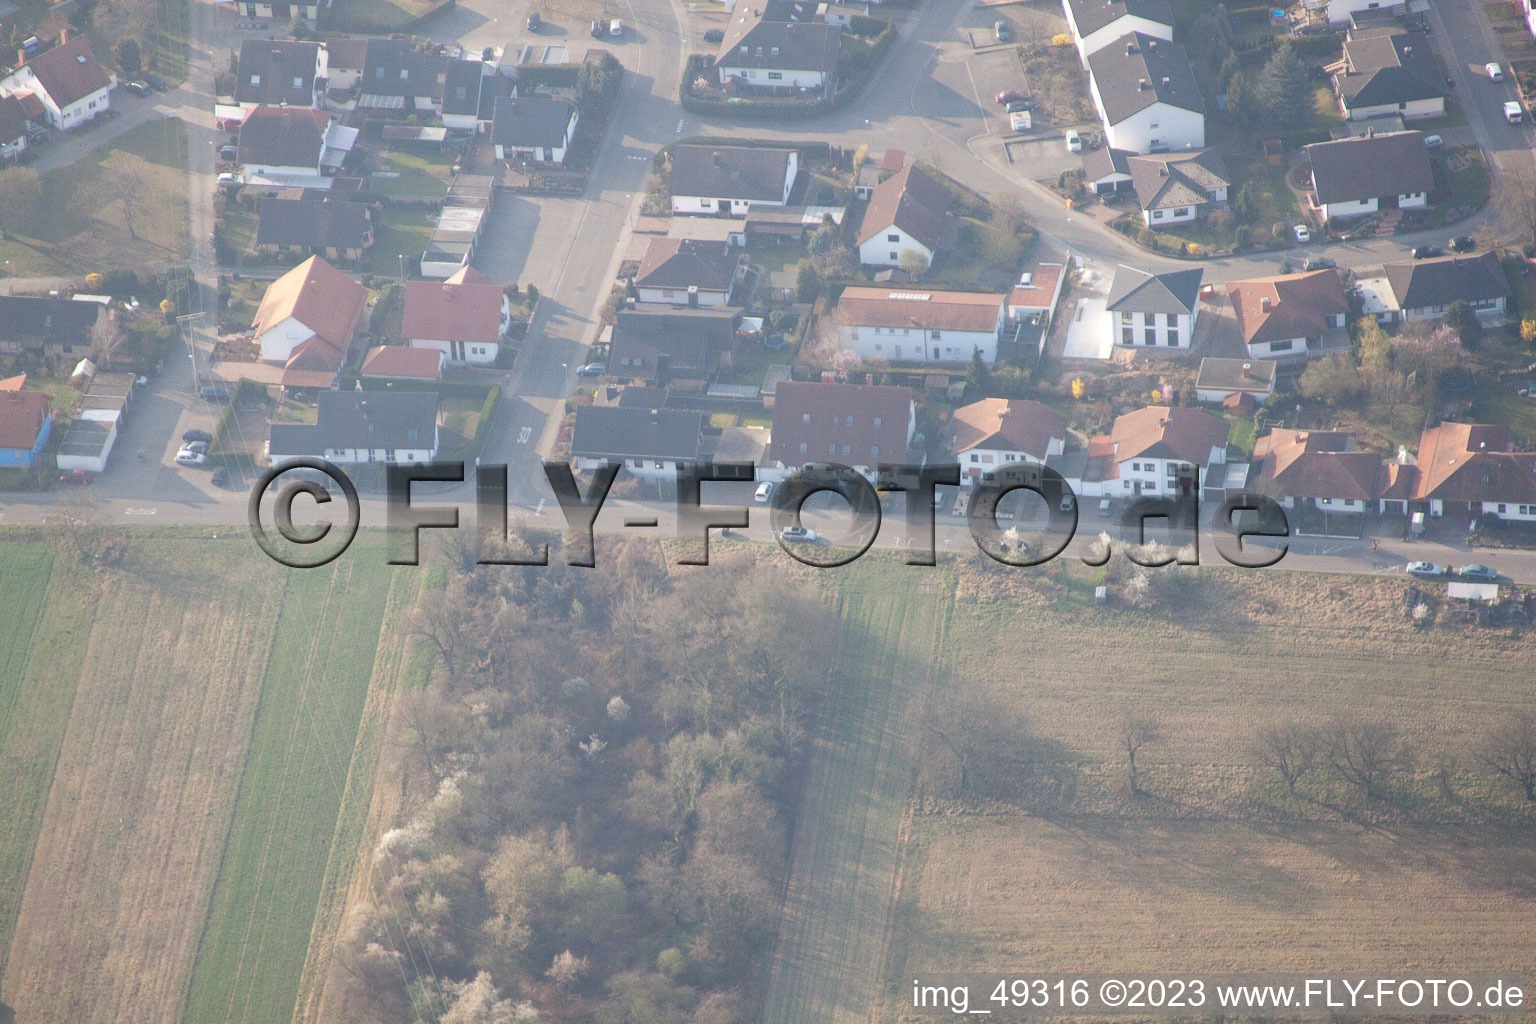 Lingenfeld in the state Rhineland-Palatinate, Germany from above